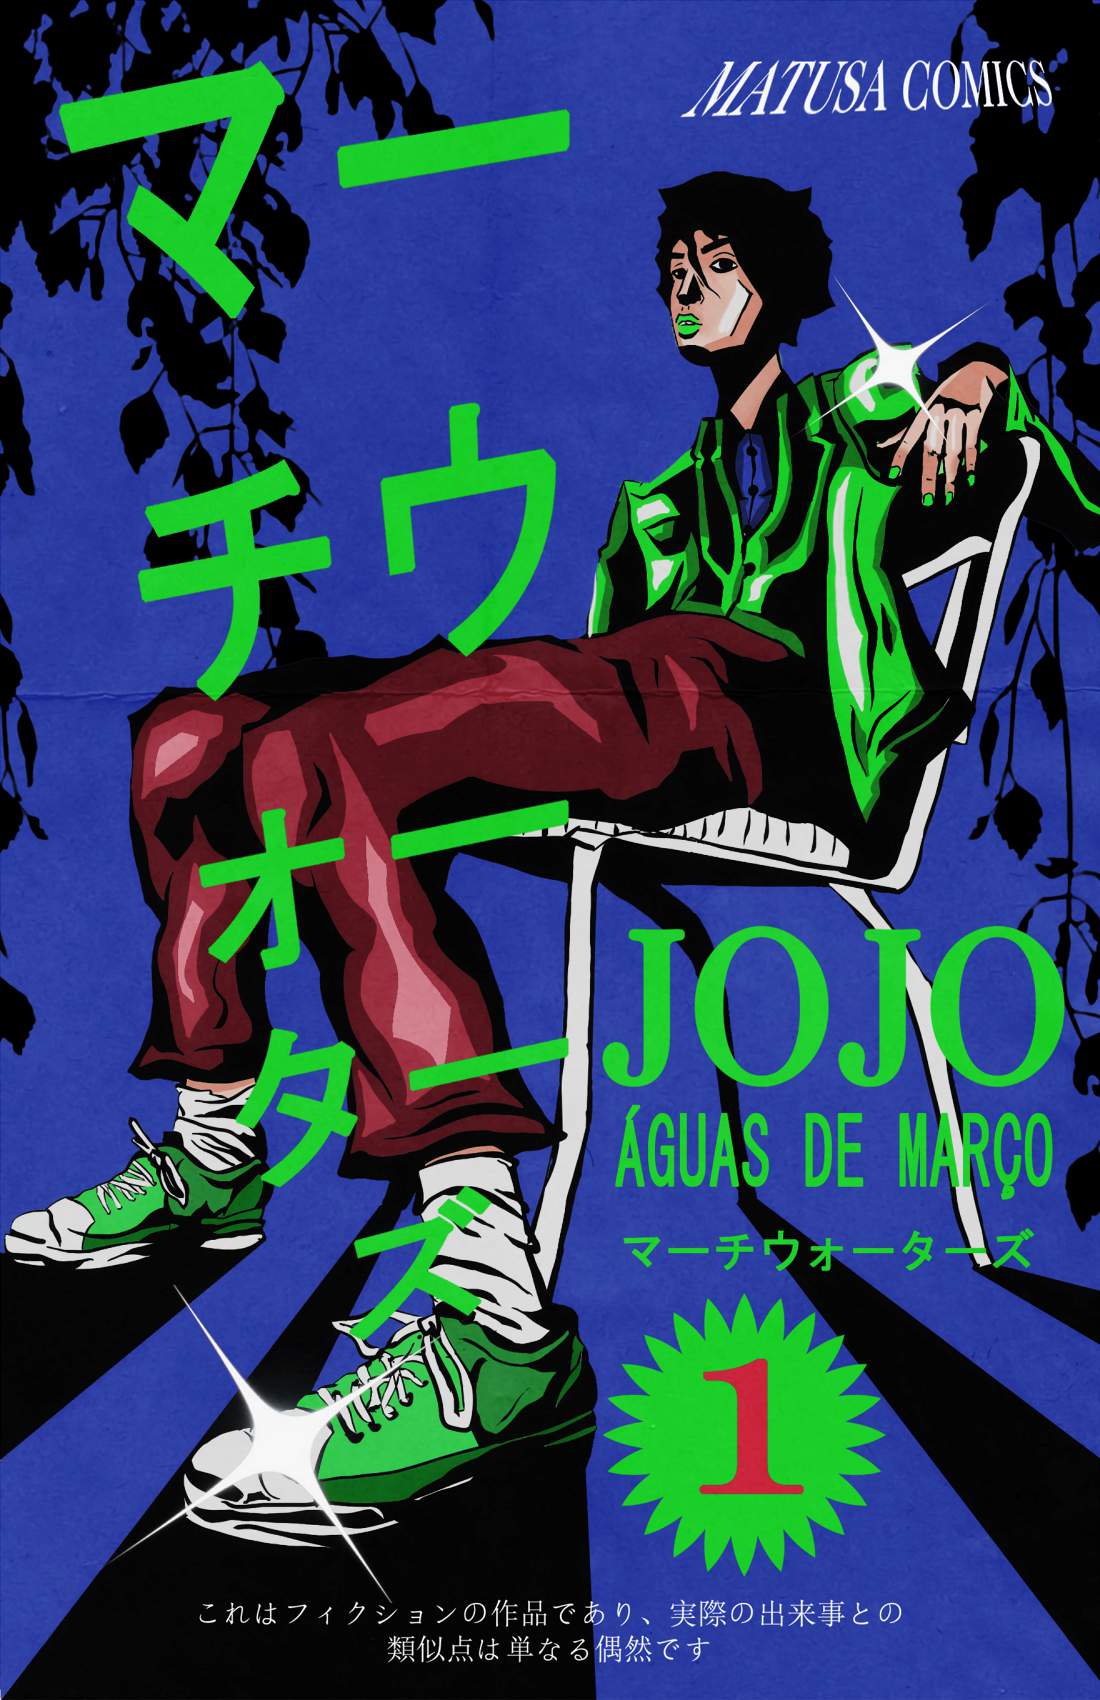 First Cover I Ve Made For My Fan Part Also My First Post Here Lol Sup Guys Jojo Amino Amino